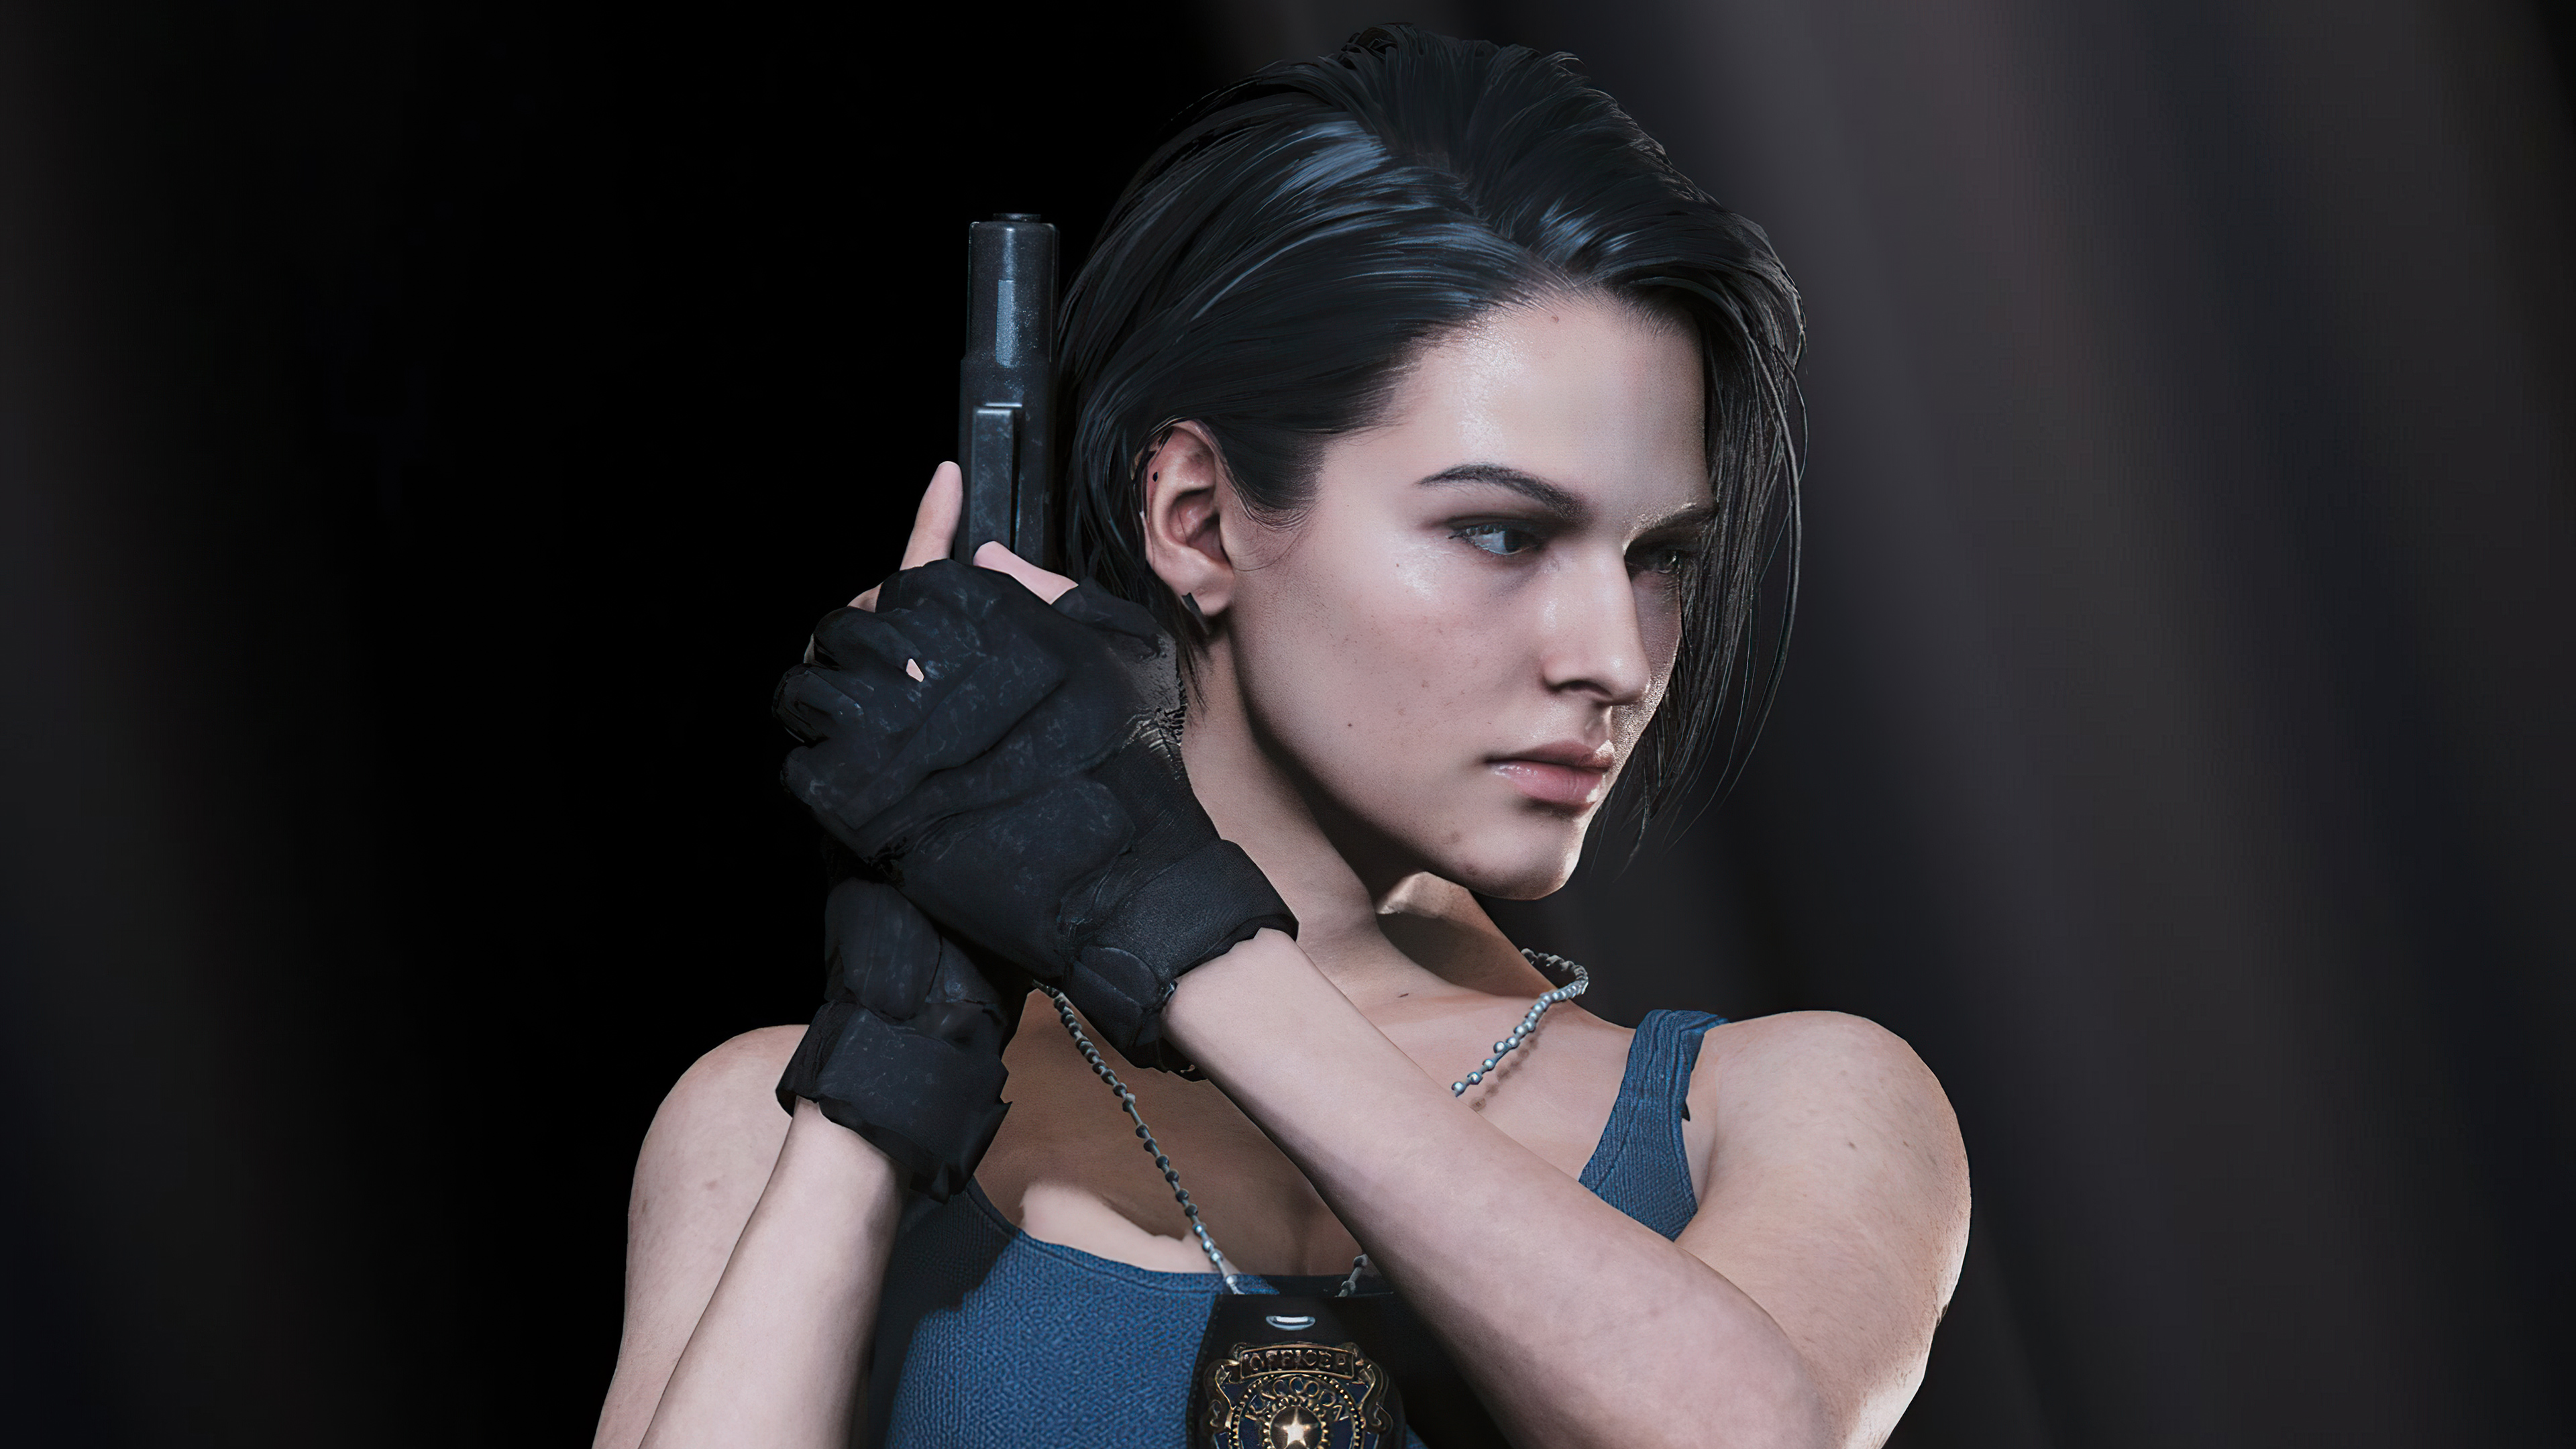 60+ Jill Valentine HD Wallpapers and Backgrounds